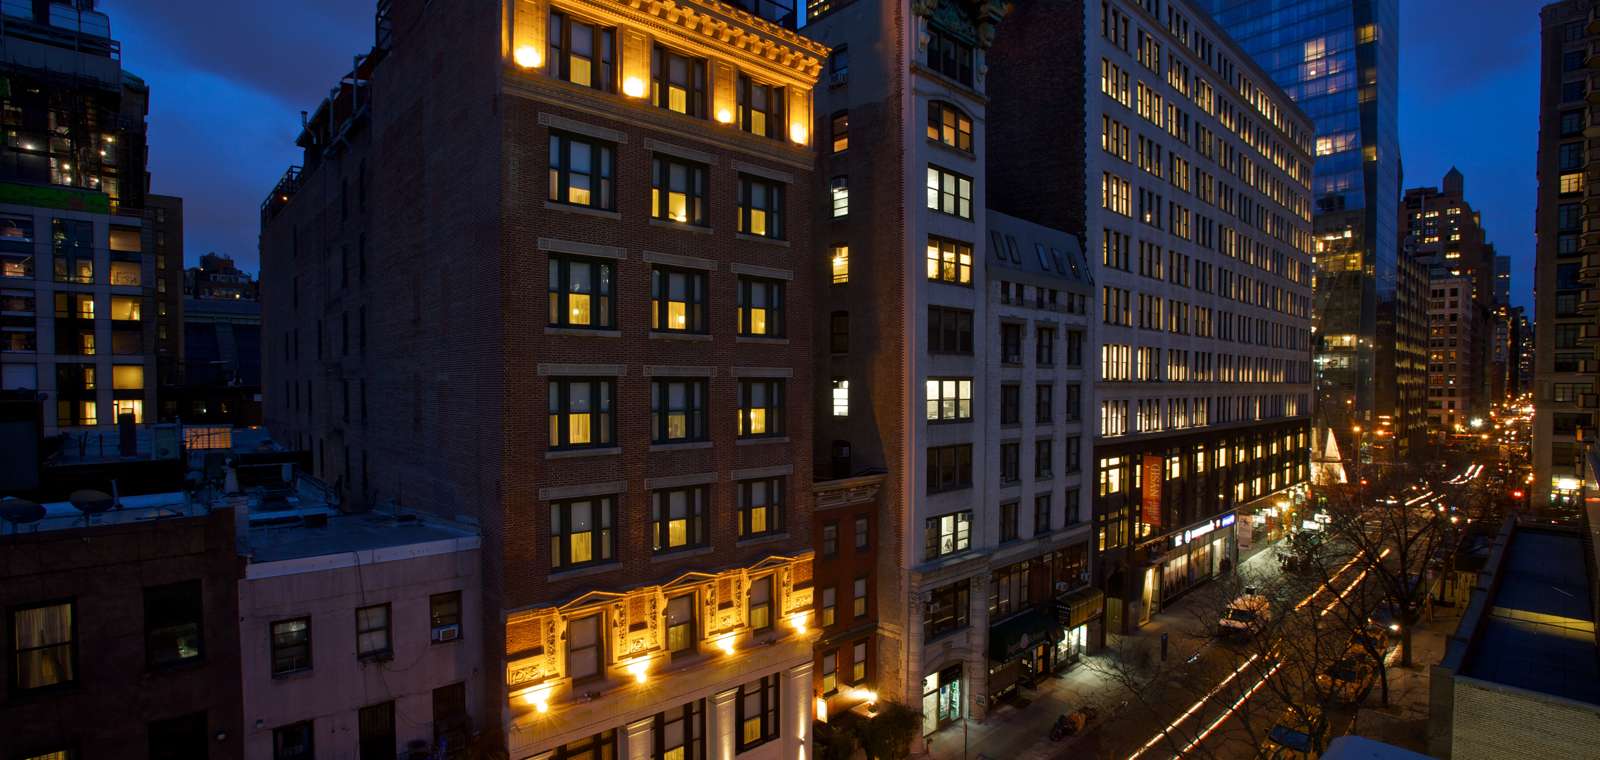 Exterior Of Park South Hotel At Night